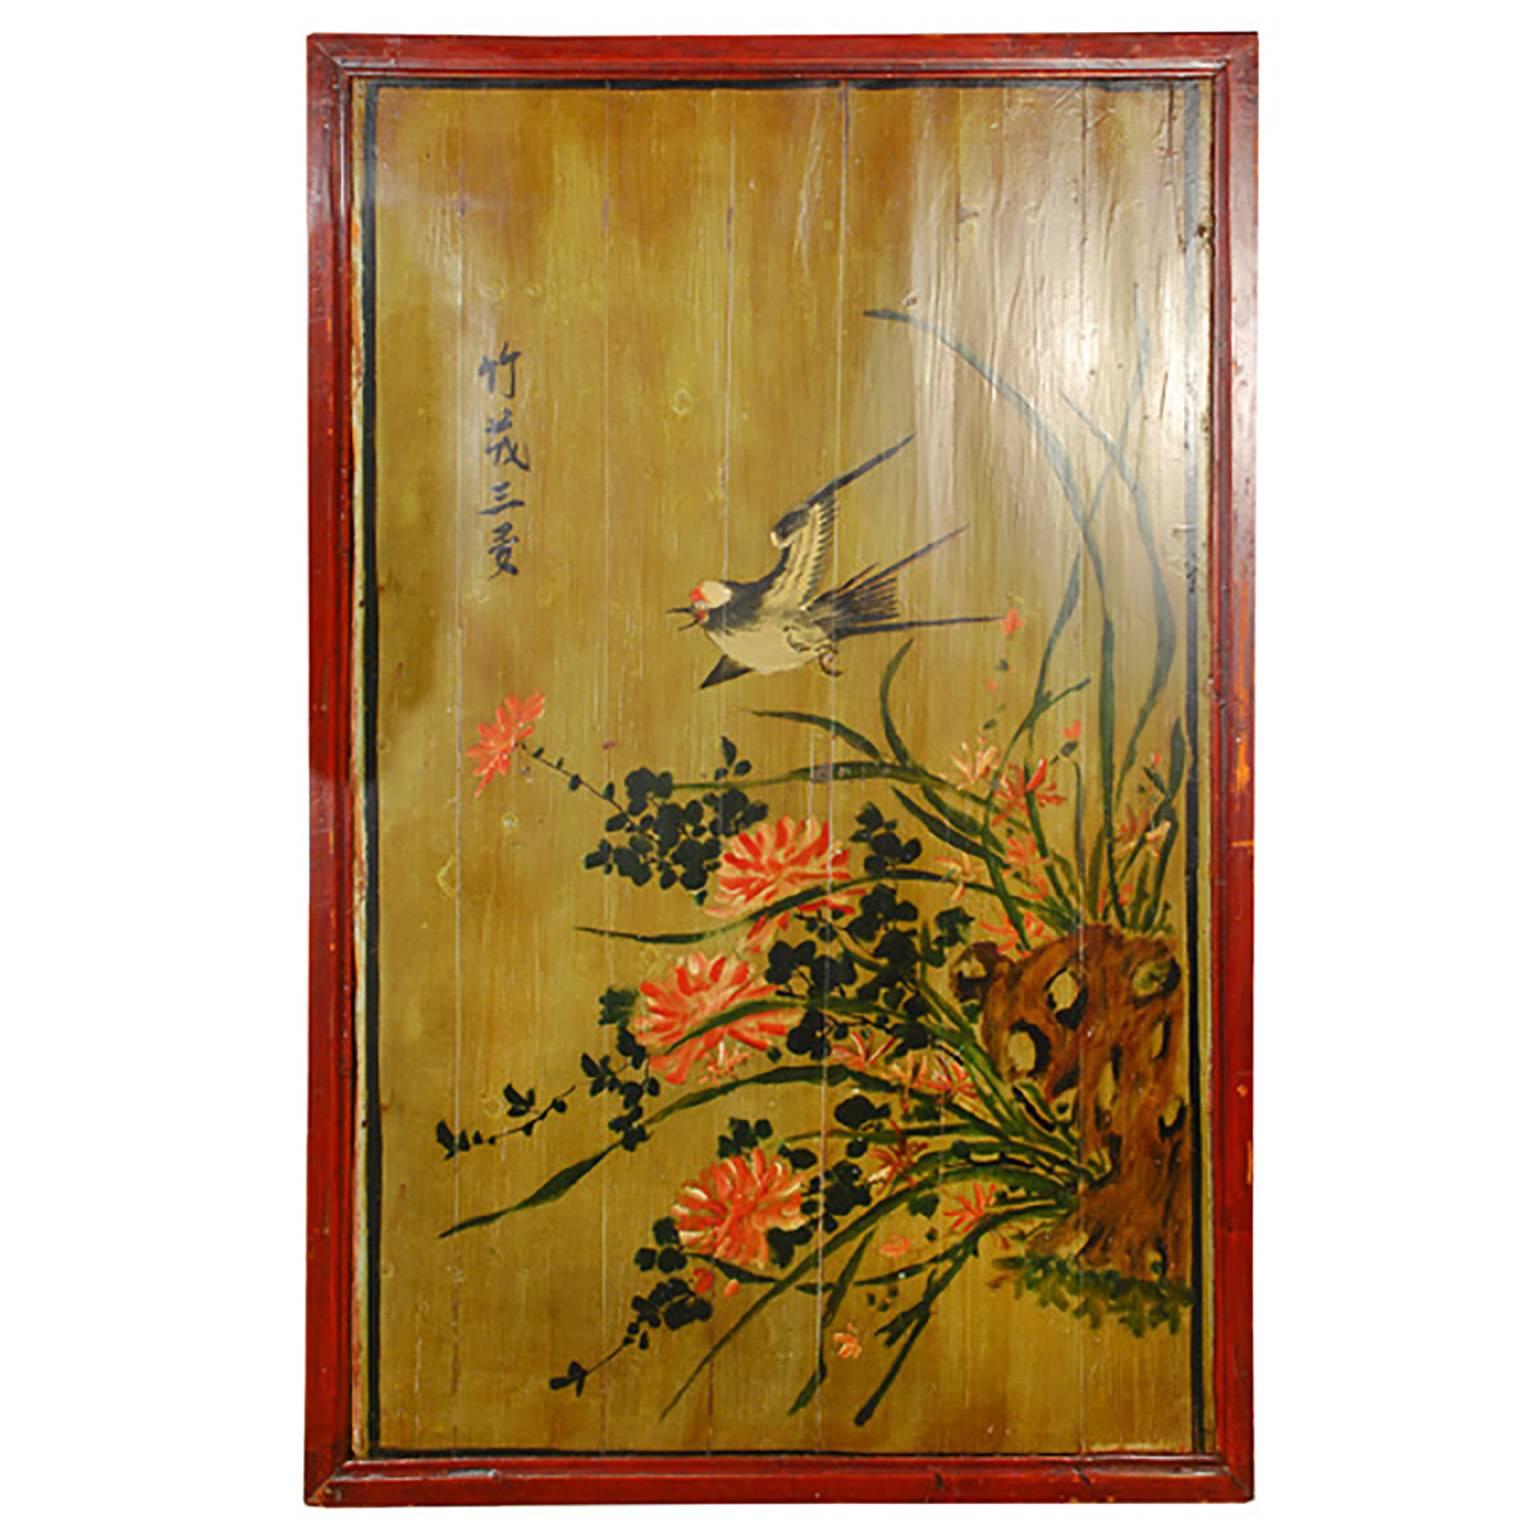 20th Century Chinese Painted Bed Panel with Swallow and Botanicals